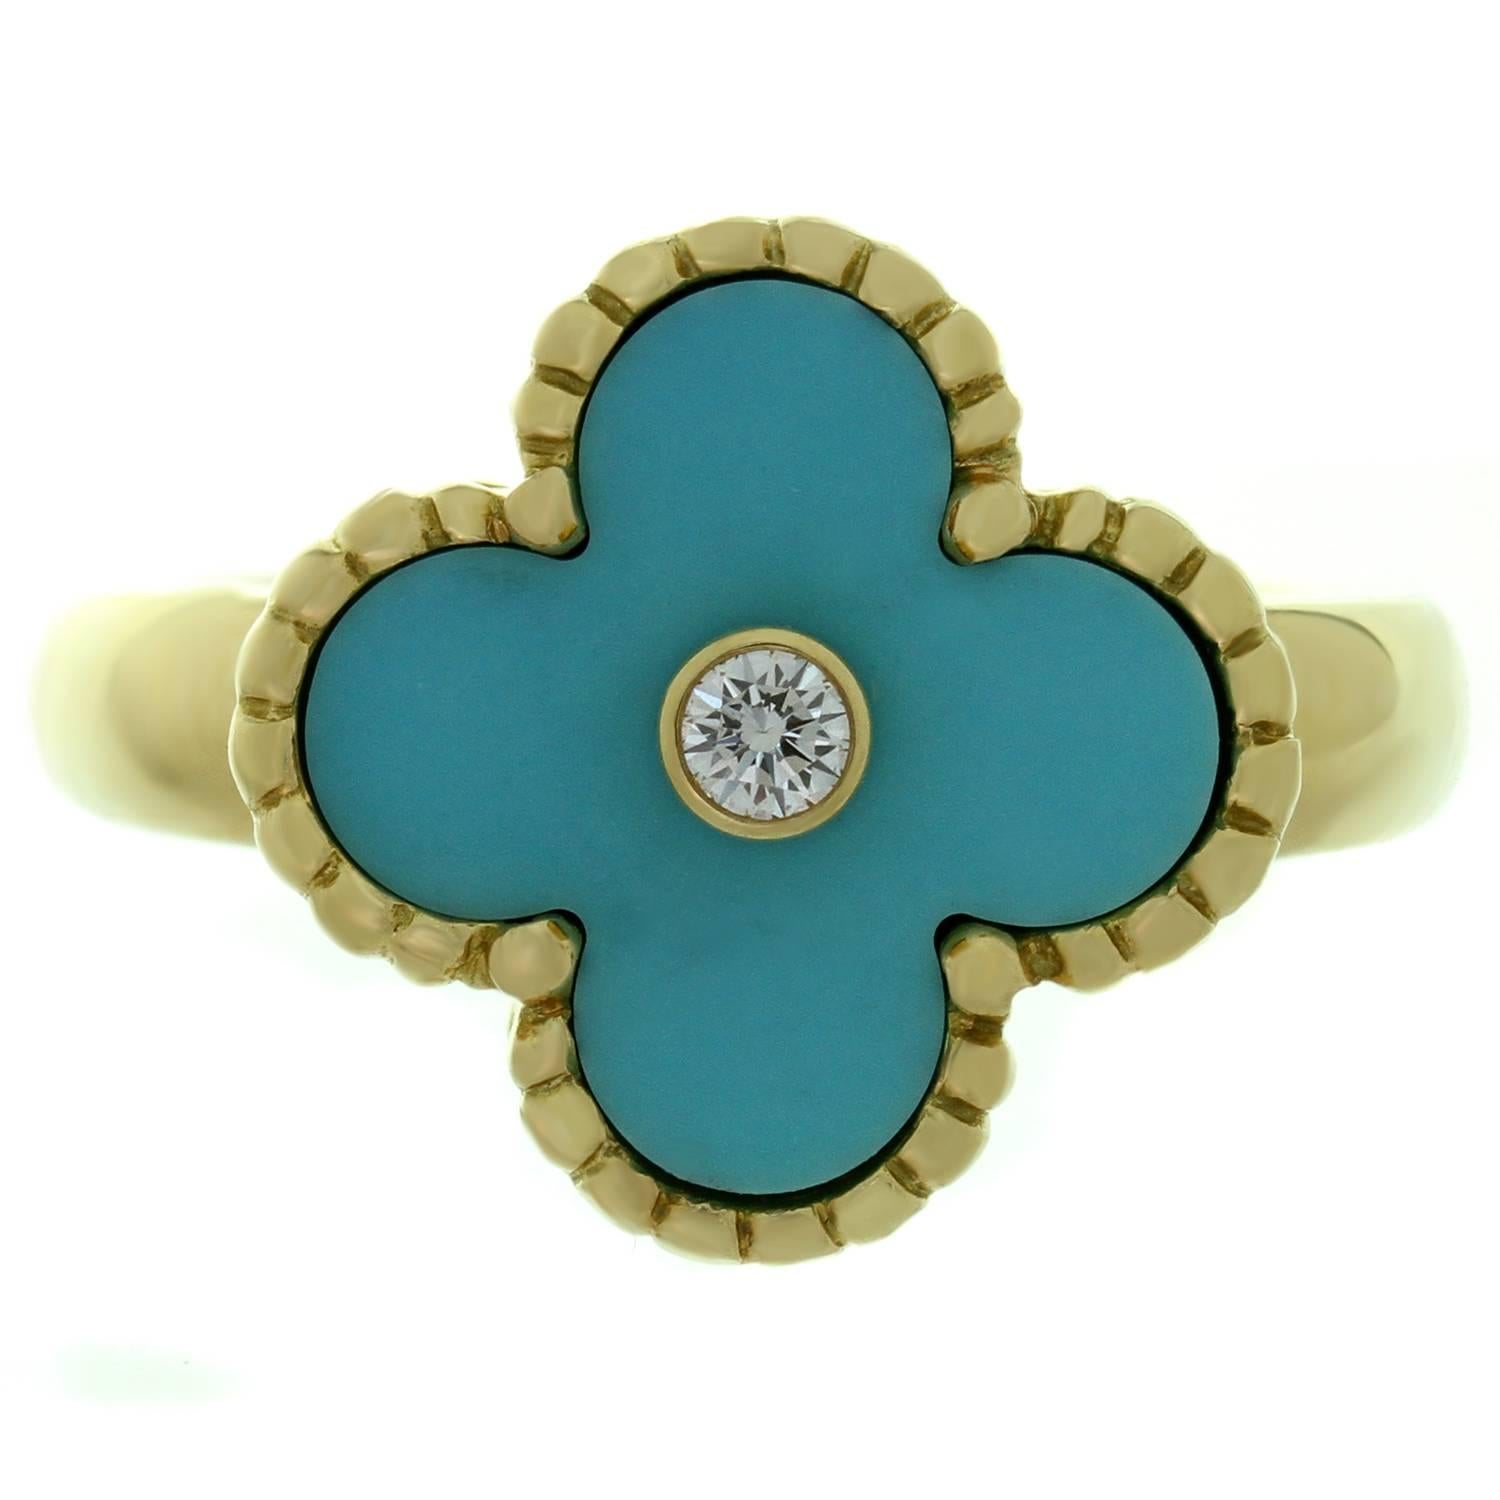 This fabulous Van Cleef & Arpels ring from the iconic Vintage Alhambra collection features the lucky clover design crafted in 18k yellow gold and beautifully accented with blue turquoise and a bezel-set brilliant-cut round diamond of an estimated